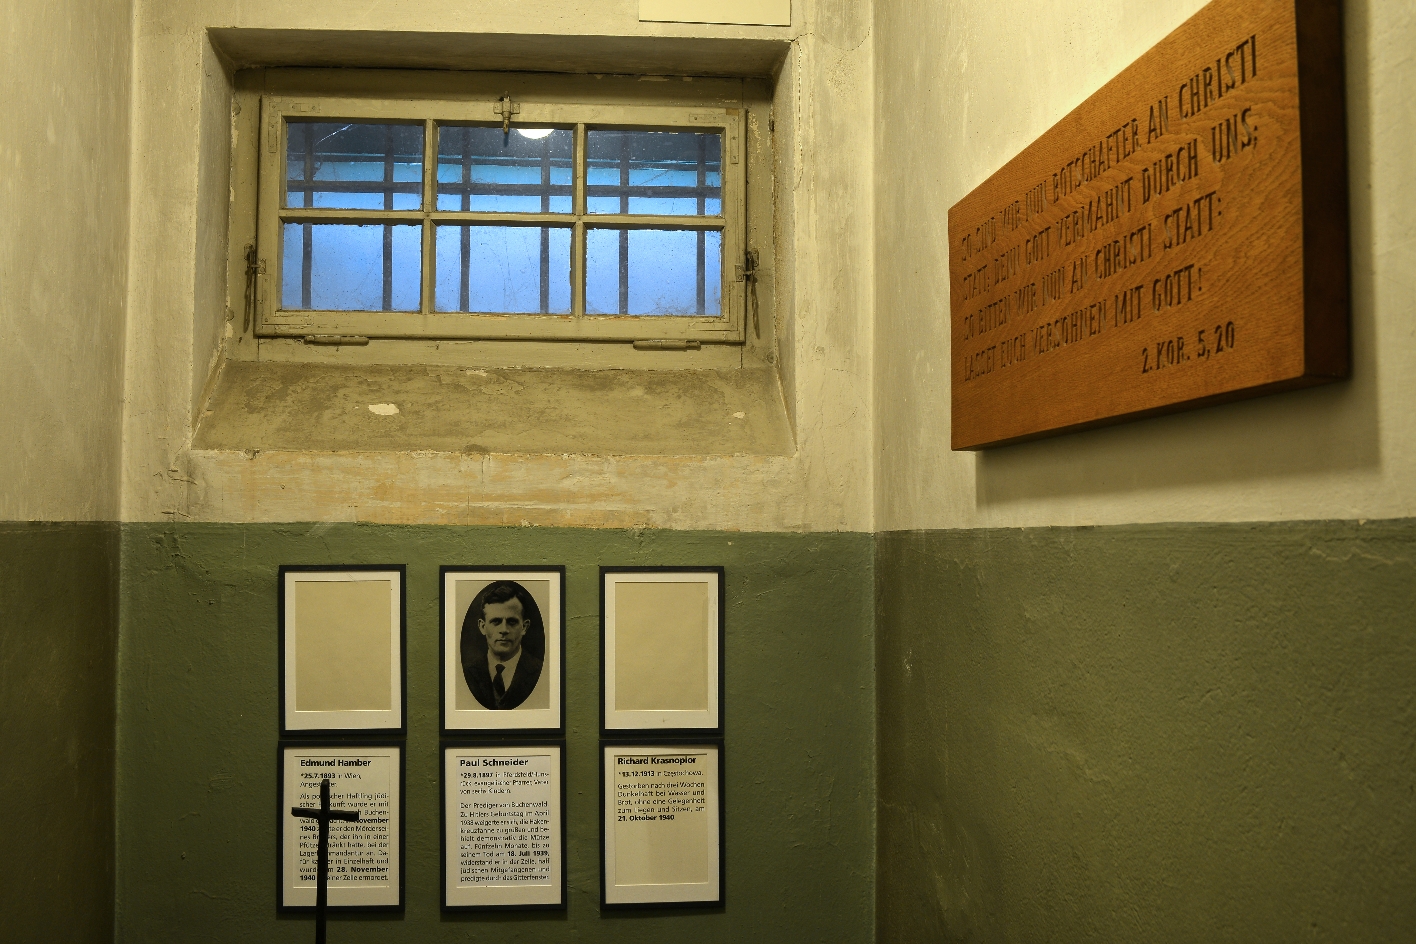 View into a cell of the detention cell building. The cell is very small. Below a barred and blinded window are picture frames commemorating Edmund Haber, Paul Schneider, and Richard Krasnopior. On the left of the wall hangs a wooden plaque with the engraving: "So now we are ambassadors in Christ's stead, in that God admonishes, as it were, through us; we pray for Christ: be reconciled to God!" 